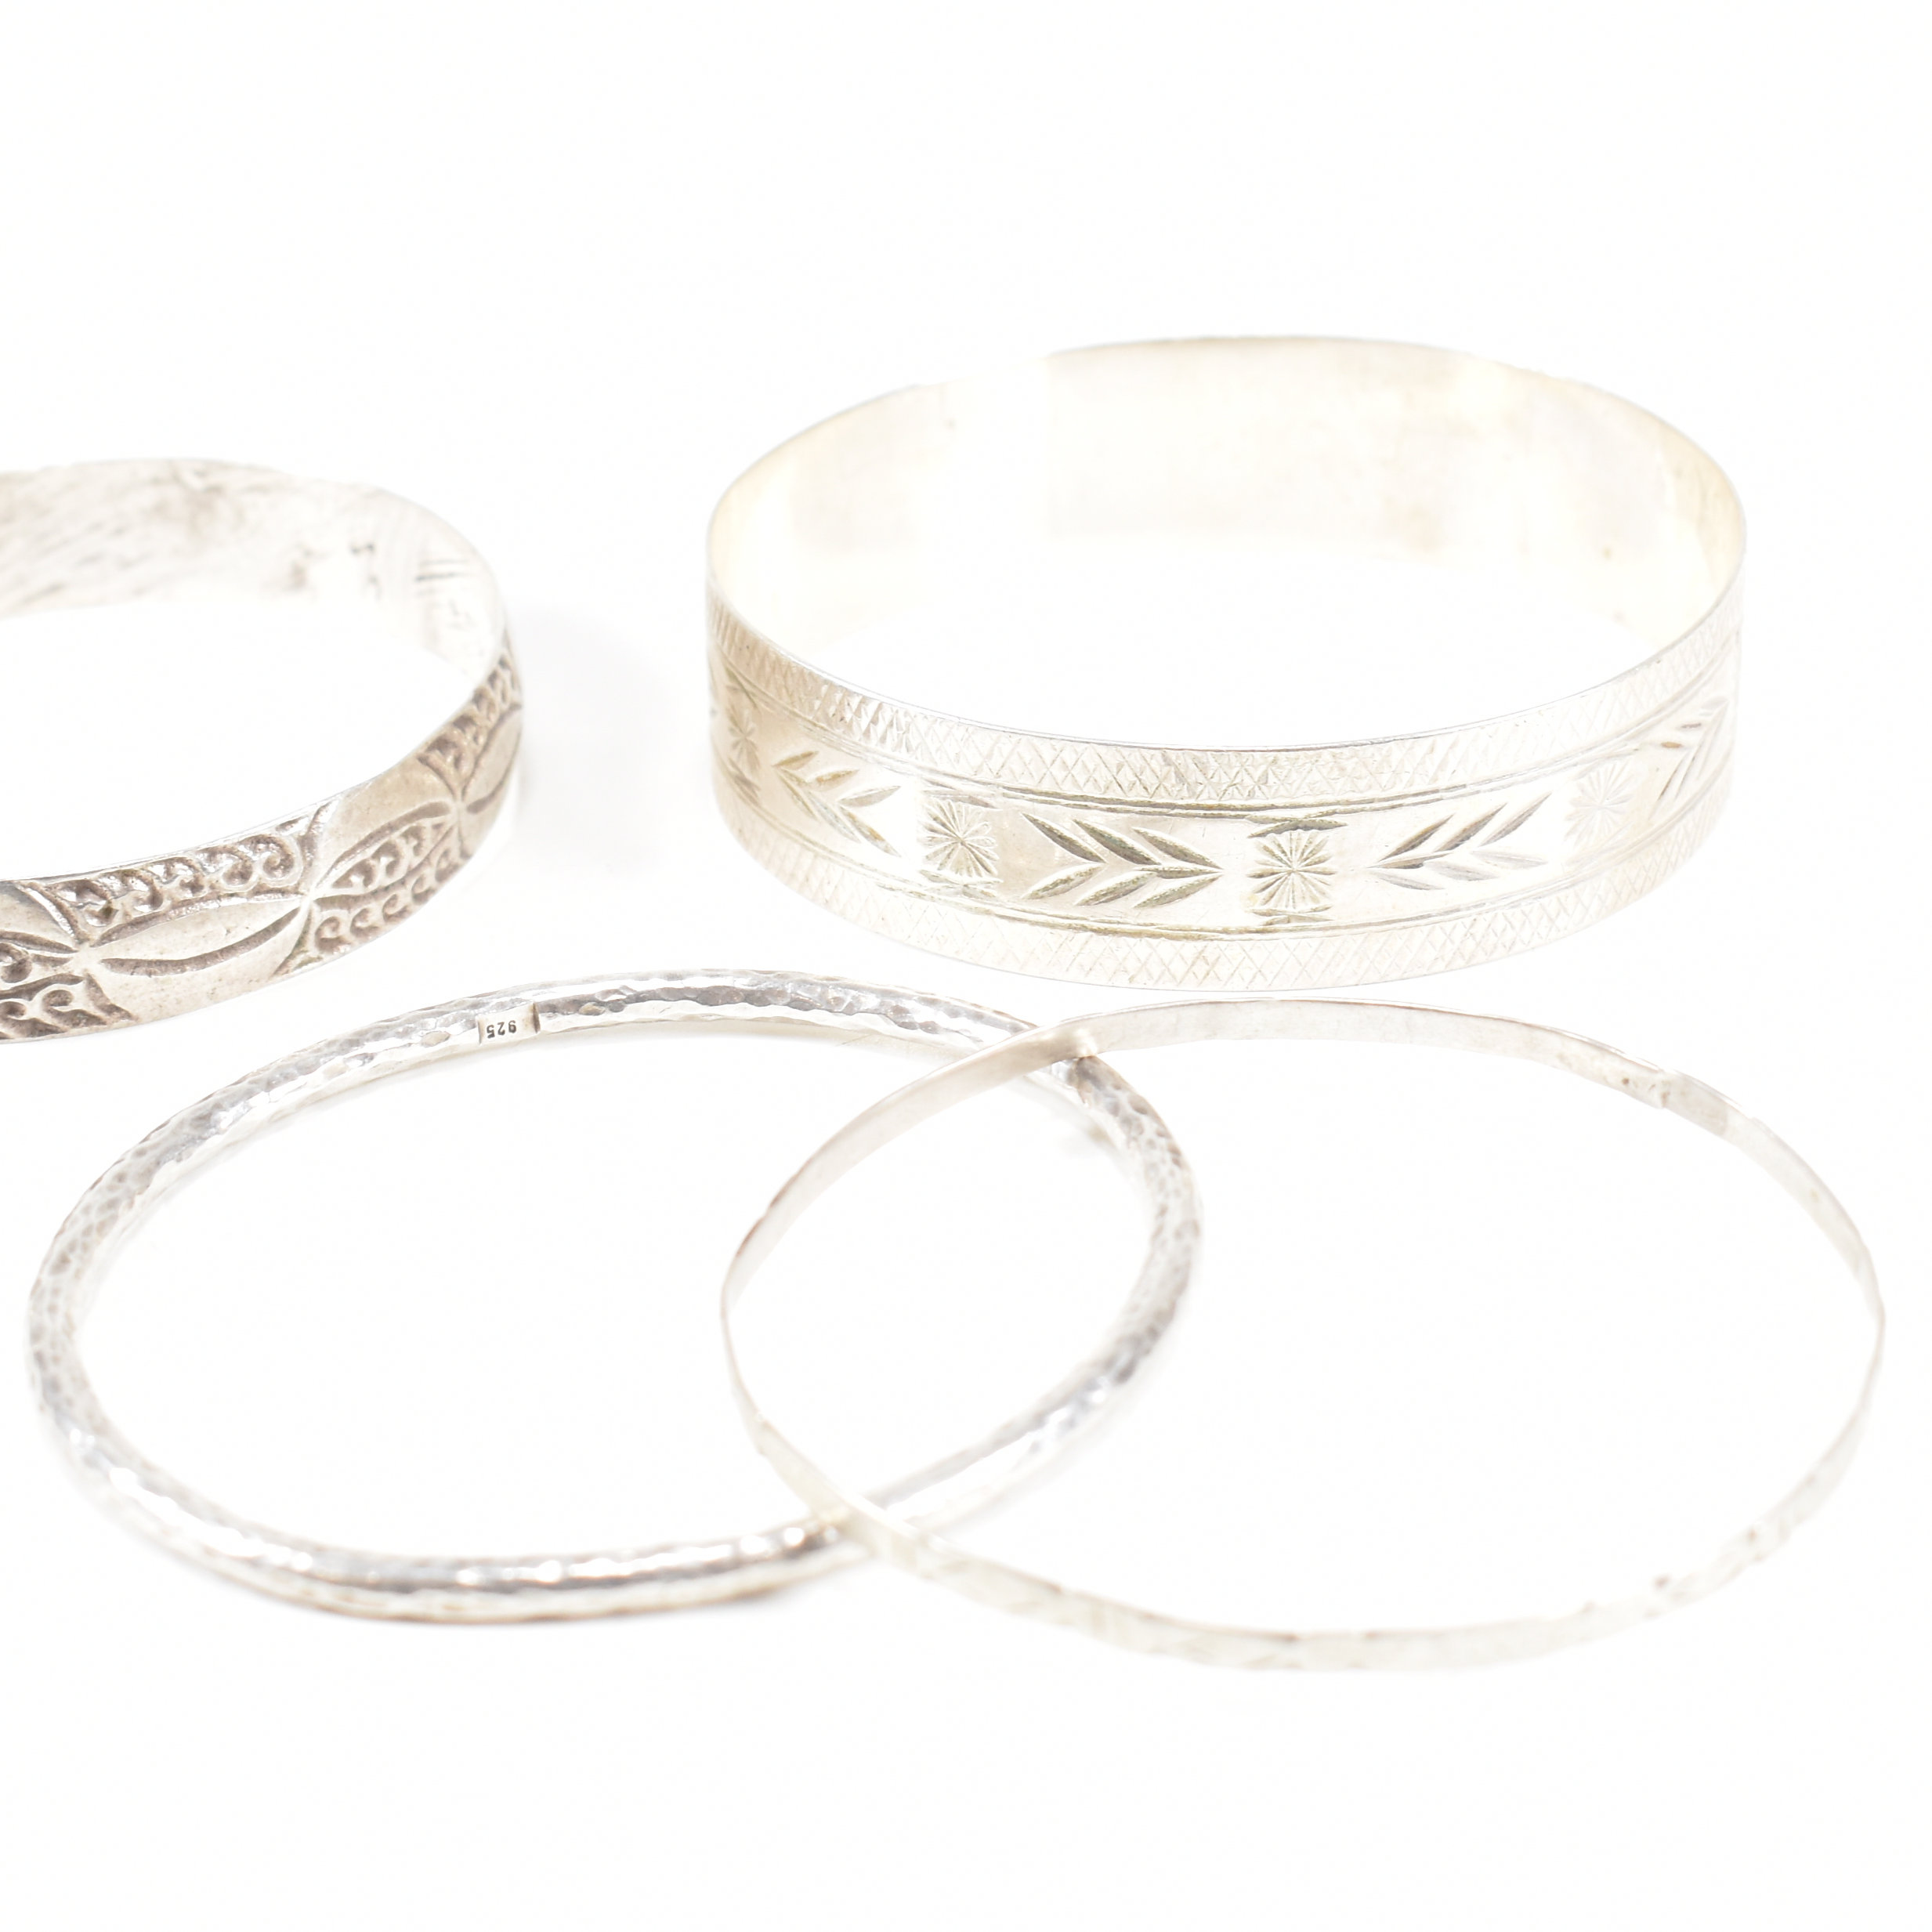 COLLECTION OF 5 925 SILVER & WHITE METAL BANGLES - Image 6 of 8